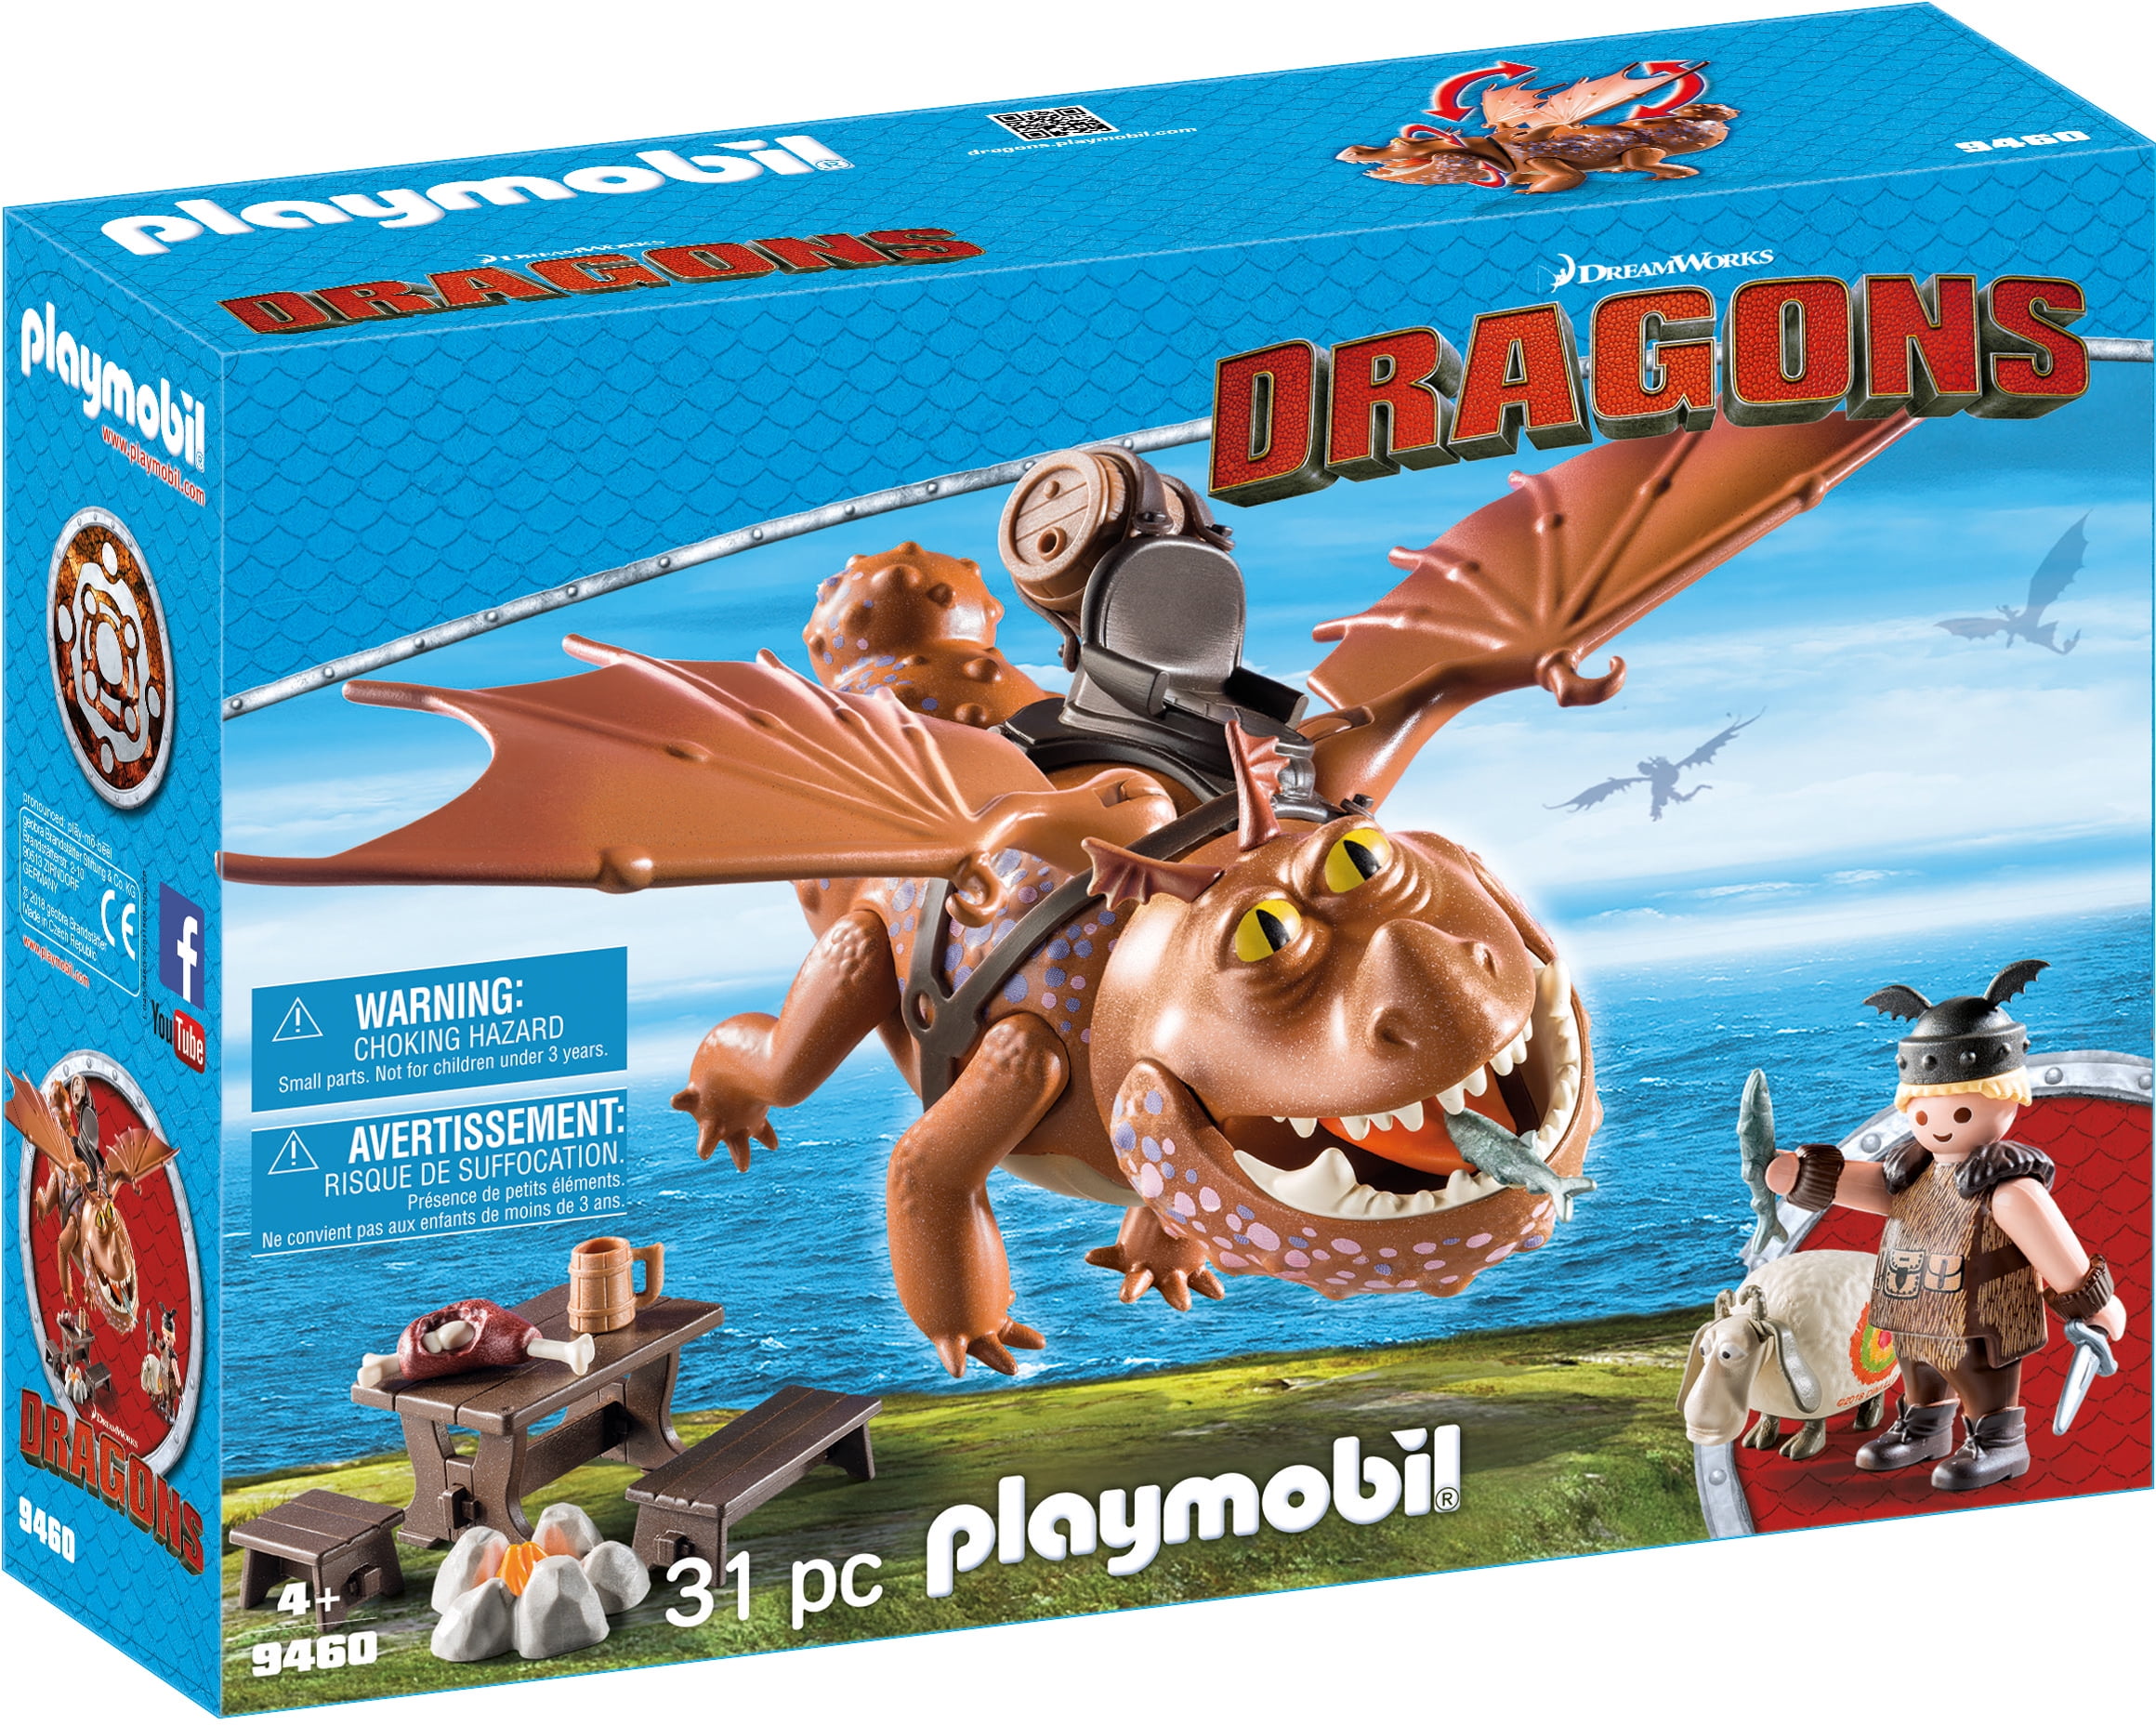 PLAYMOBIL How To Train Your Dragon Fishlegs and Meatlug Action